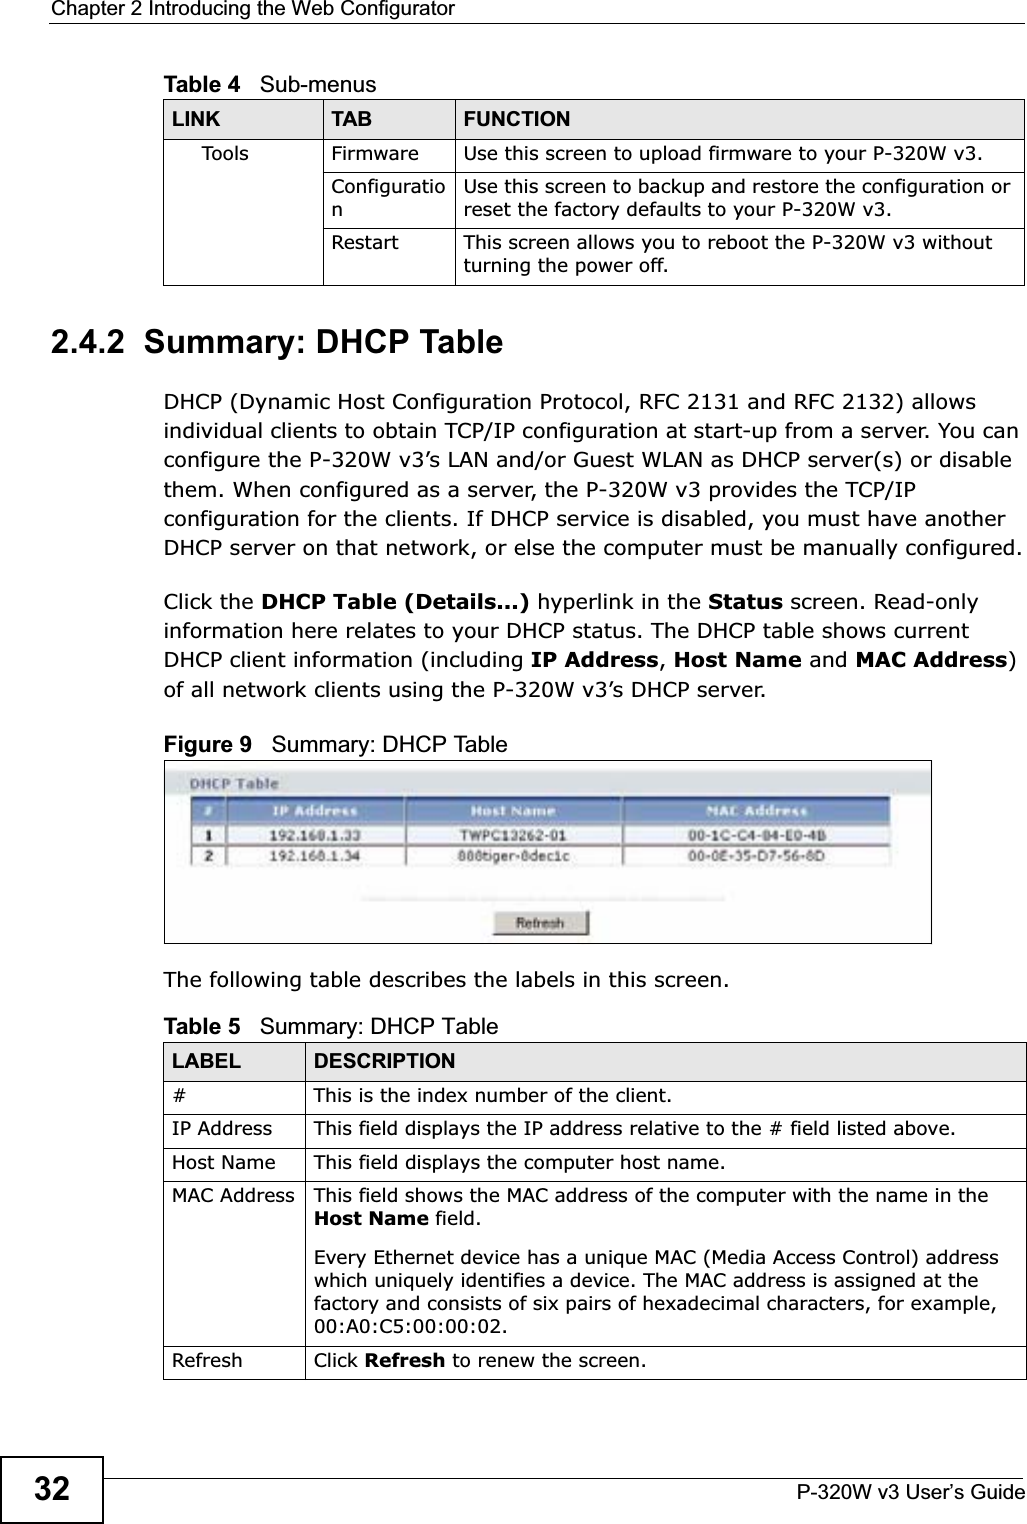 Chapter 2 Introducing the Web ConfiguratorP-320W v3 User’s Guide322.4.2  Summary: DHCP Table   DHCP (Dynamic Host Configuration Protocol, RFC 2131 and RFC 2132) allows individual clients to obtain TCP/IP configuration at start-up from a server. You can configure the P-320W v3’s LAN and/or Guest WLAN as DHCP server(s) or disable them. When configured as a server, the P-320W v3 provides the TCP/IP configuration for the clients. If DHCP service is disabled, you must have another DHCP server on that network, or else the computer must be manually configured.Click the DHCP Table (Details...) hyperlink in the Status screen. Read-only information here relates to your DHCP status. The DHCP table shows current DHCP client information (including IP Address,Host Name and MAC Address)of all network clients using the P-320W v3’s DHCP server.Figure 9   Summary: DHCP TableThe following table describes the labels in this screen.Tools Firmware Use this screen to upload firmware to your P-320W v3.ConfigurationUse this screen to backup and restore the configuration or reset the factory defaults to your P-320W v3. Restart This screen allows you to reboot the P-320W v3 without turning the power off.Table 4   Sub-menusLINK TAB FUNCTIONTable 5   Summary: DHCP TableLABEL  DESCRIPTION# This is the index number of the client. IP Address This field displays the IP address relative to the # field listed above.Host Name  This field displays the computer host name.MAC Address This field shows the MAC address of the computer with the name in the Host Name field.Every Ethernet device has a unique MAC (Media Access Control) address which uniquely identifies a device. The MAC address is assigned at the factory and consists of six pairs of hexadecimal characters, for example, 00:A0:C5:00:00:02.Refresh Click Refresh to renew the screen. 